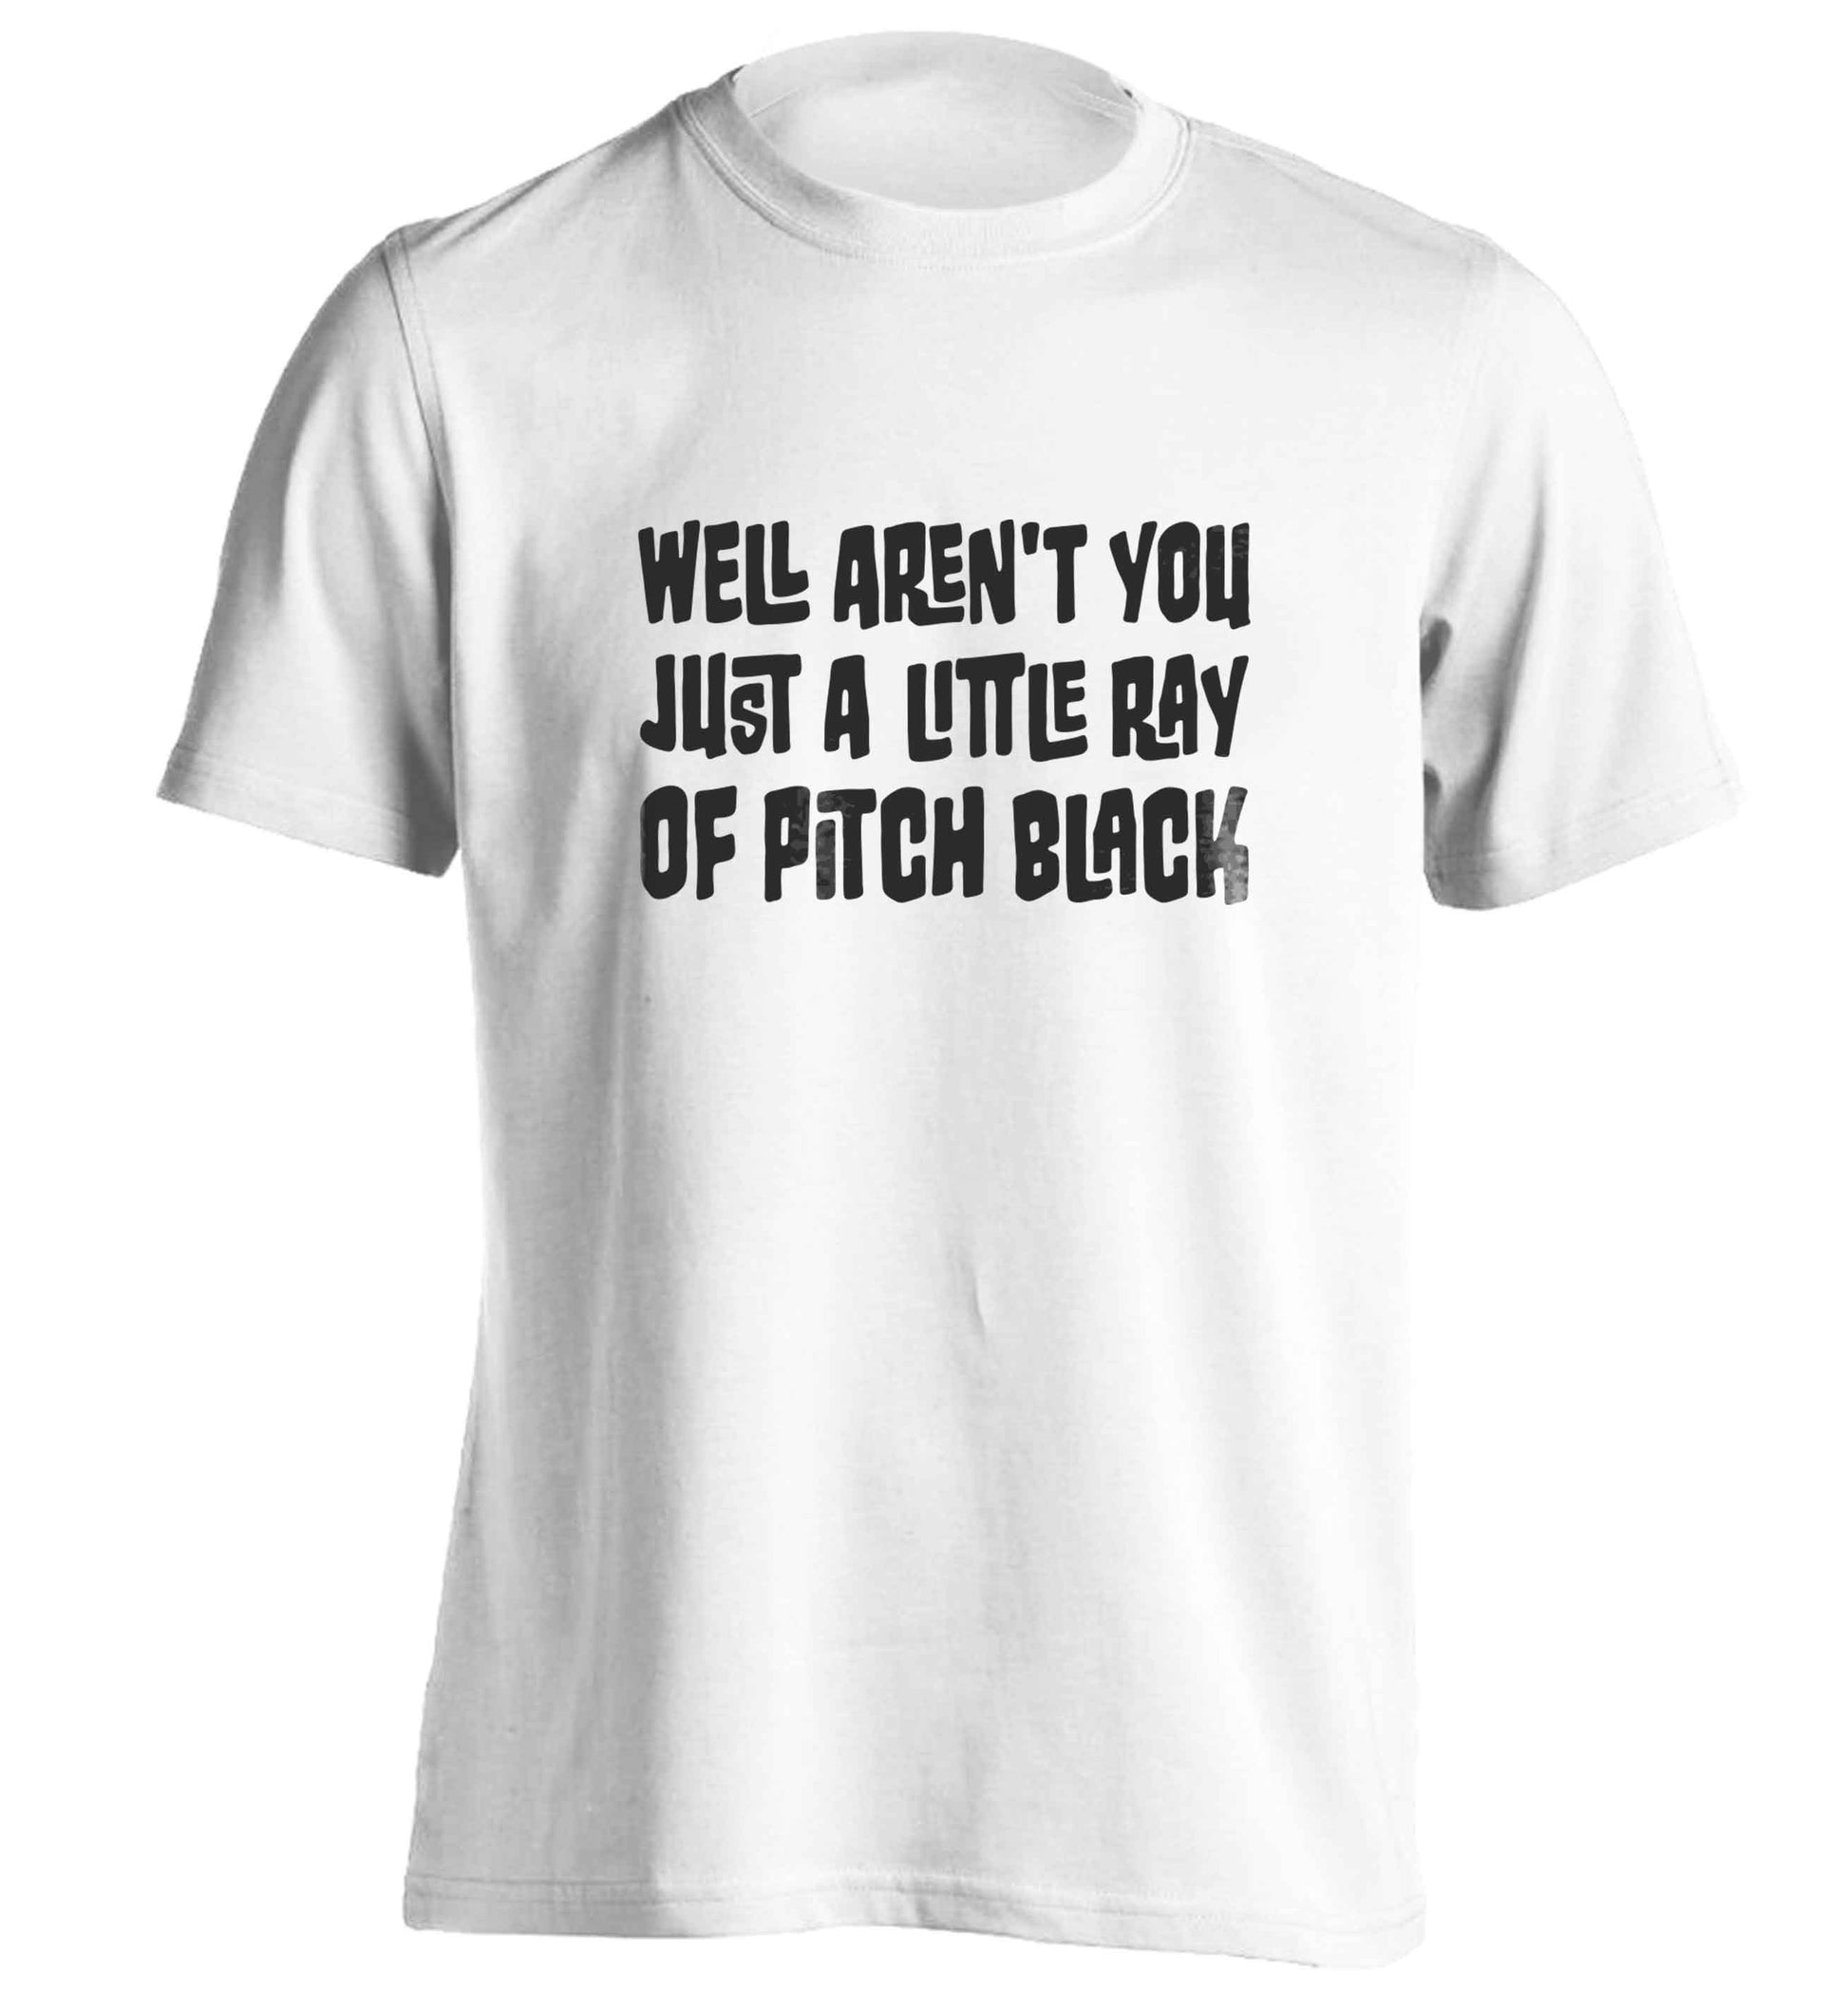 Well aren't you just a little ray of pitch black Kit adults unisex white Tshirt 2XL